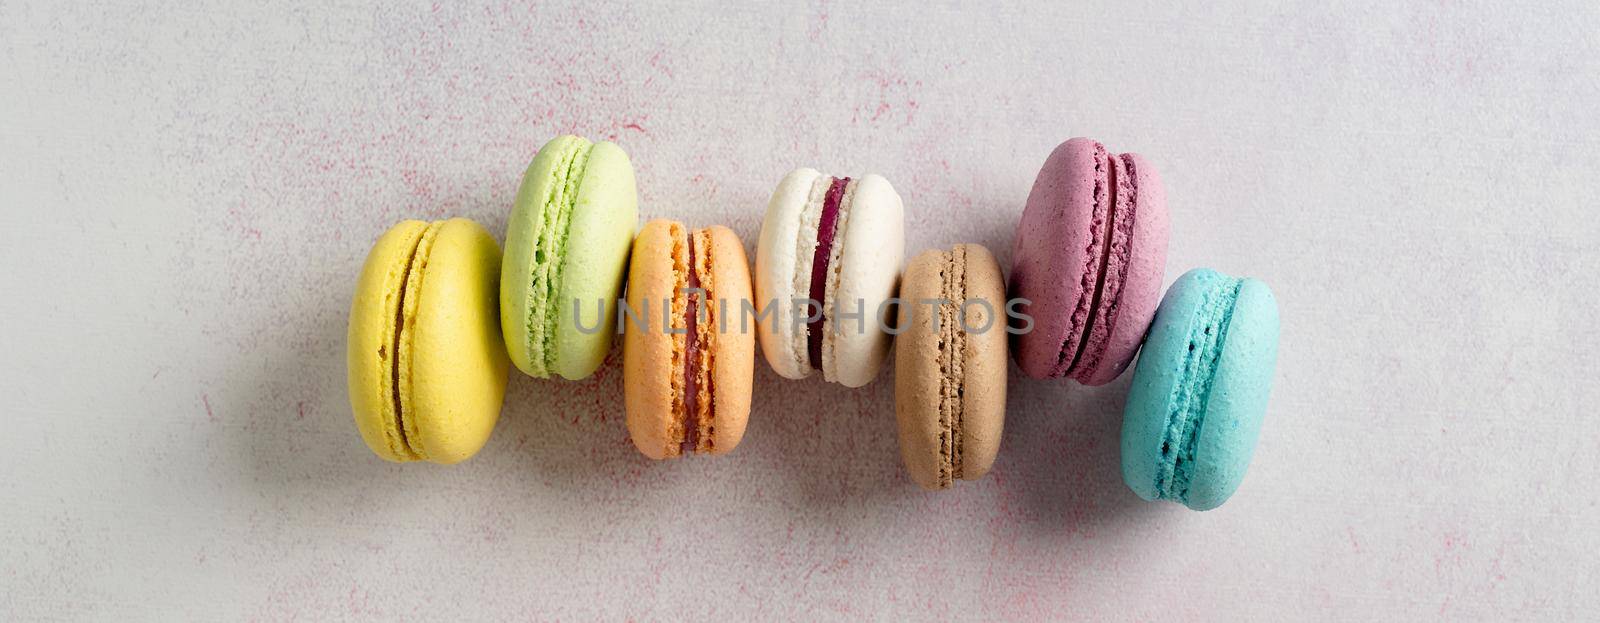 Stack of macarons, macaroons French cookie by Desperada